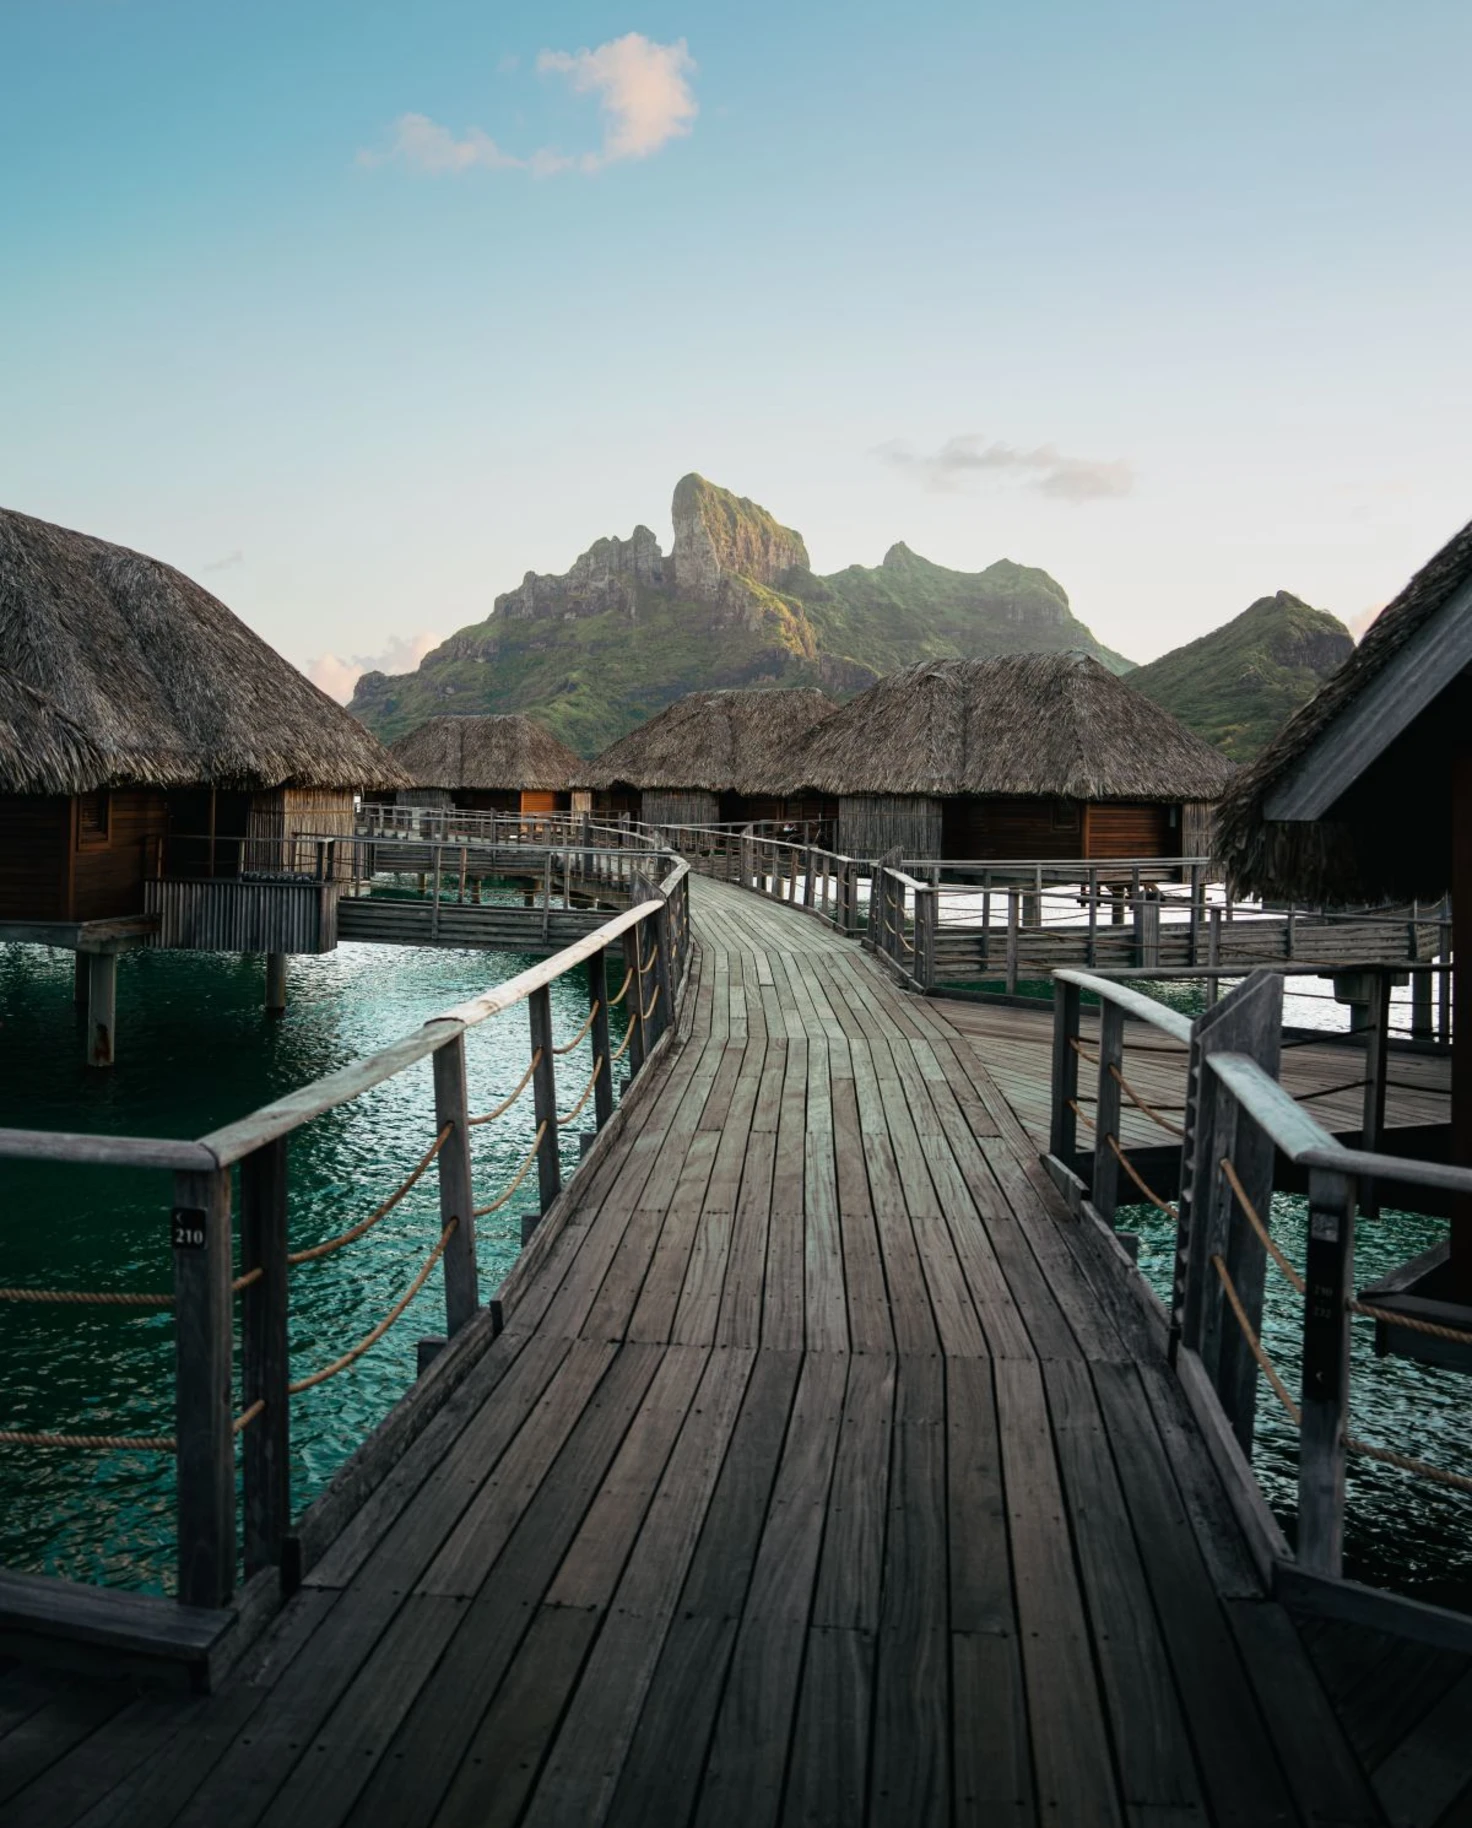 wooden pathway leading to numerous over-water bungalows